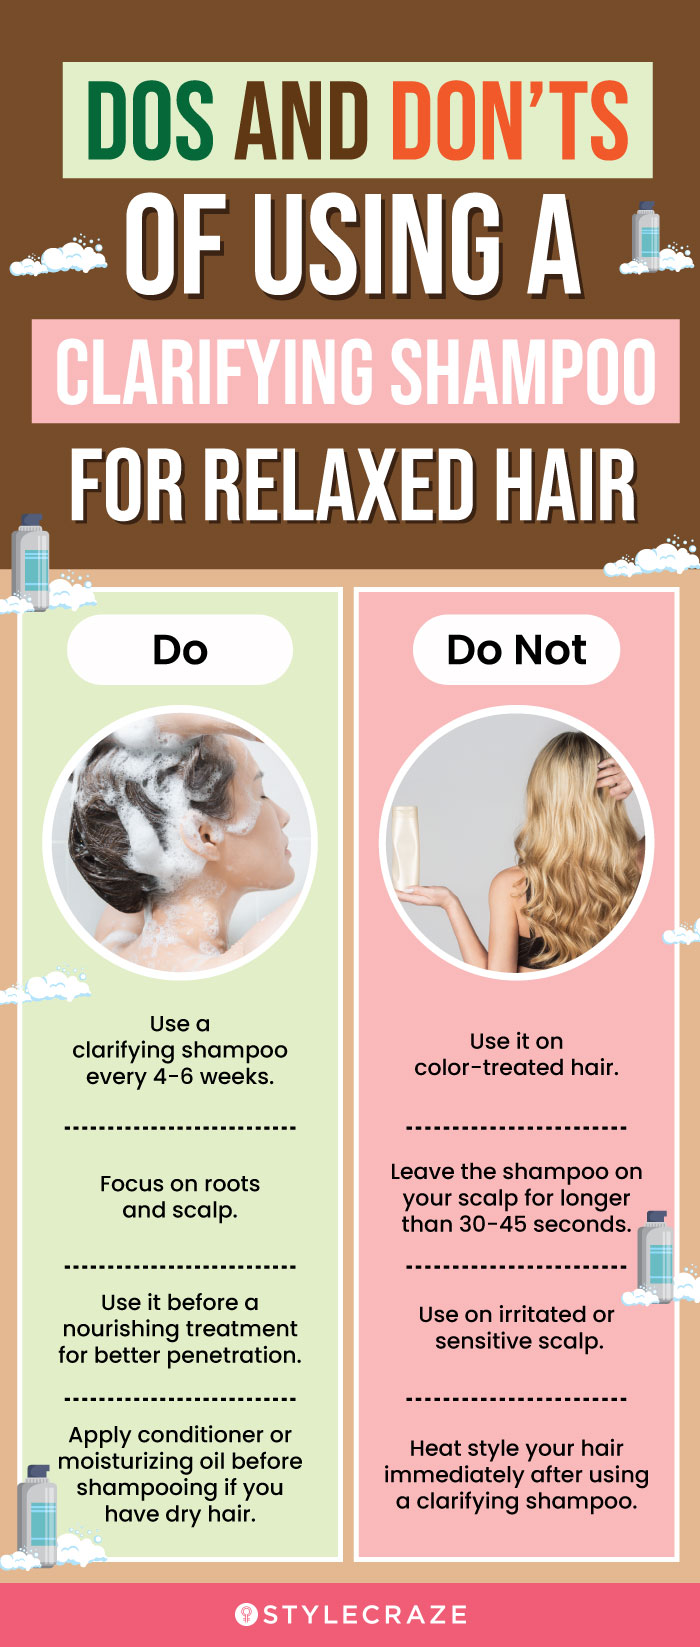 Dos And Don’ts Of Using A Clarifying Shampoo For Relaxed Hair (infographic)